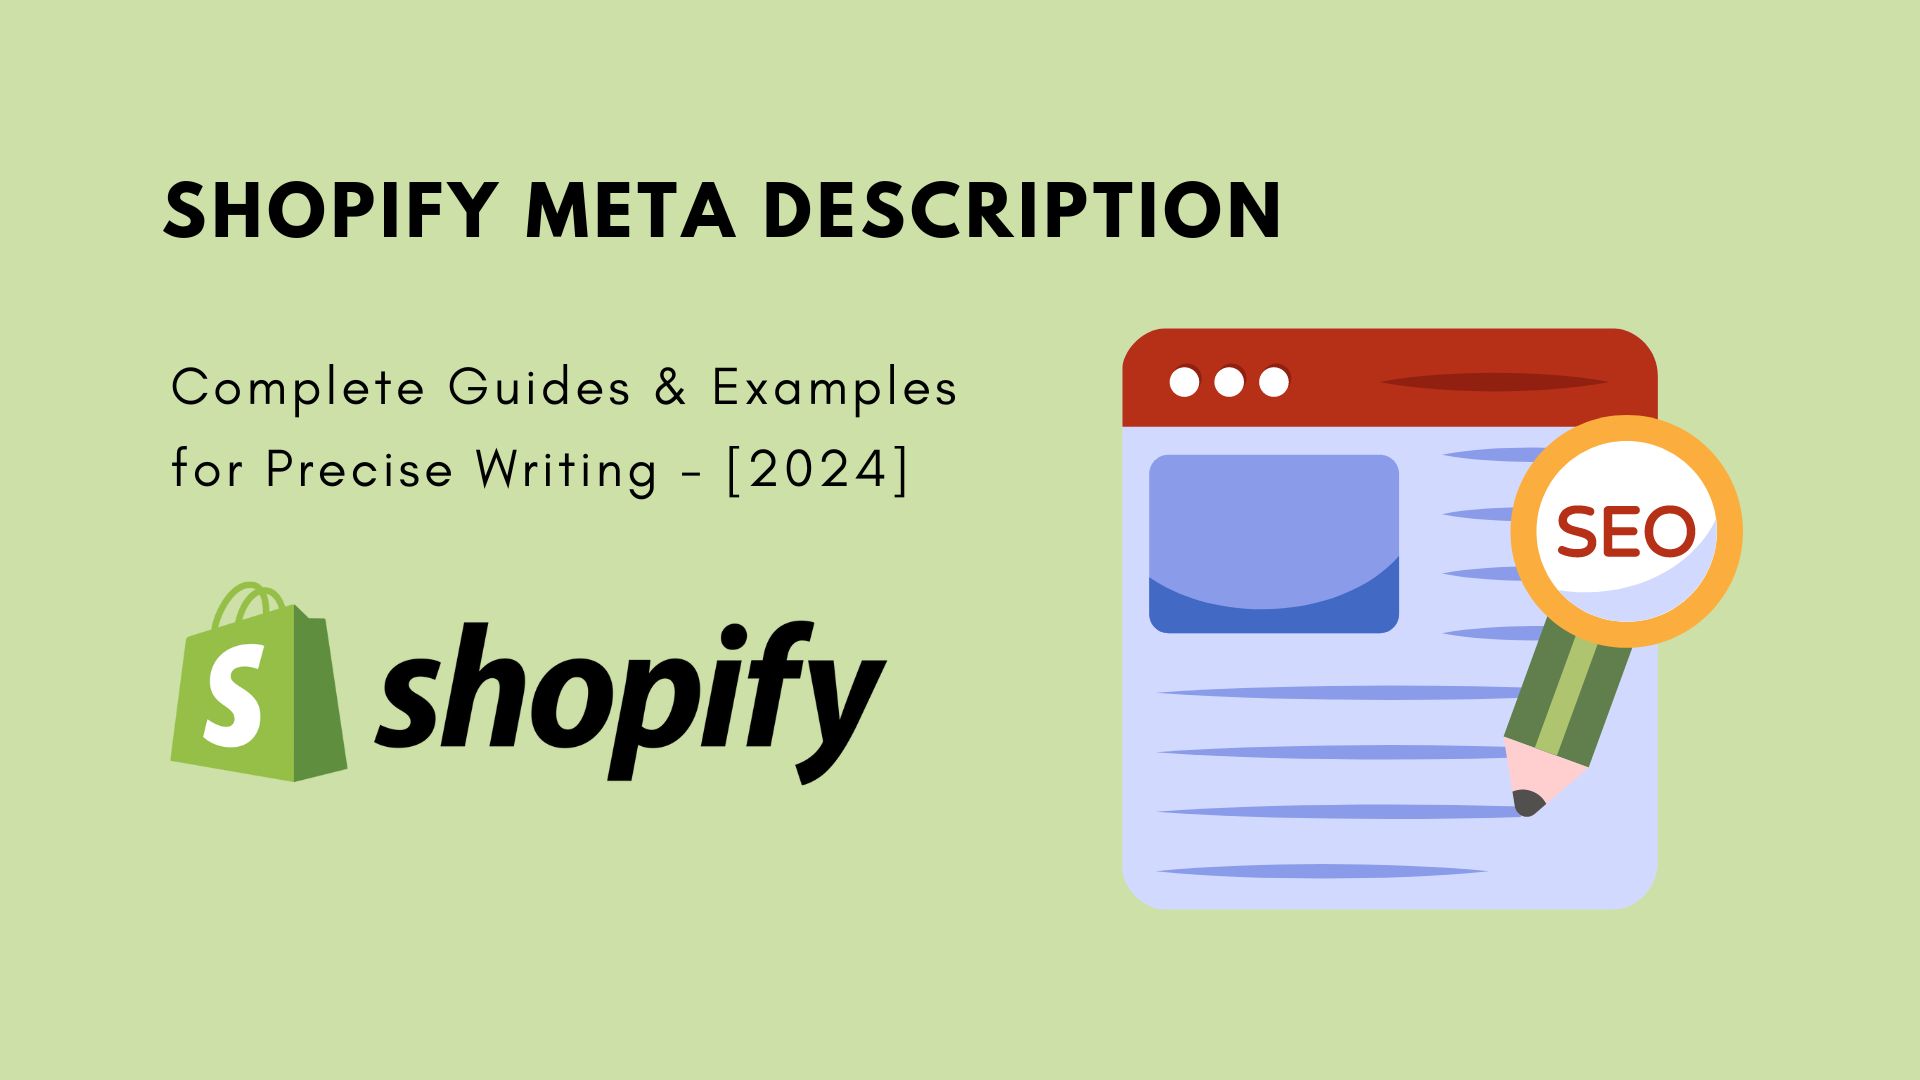 Shopify Meta Description: Complete Guides & Examples for Precise Writing